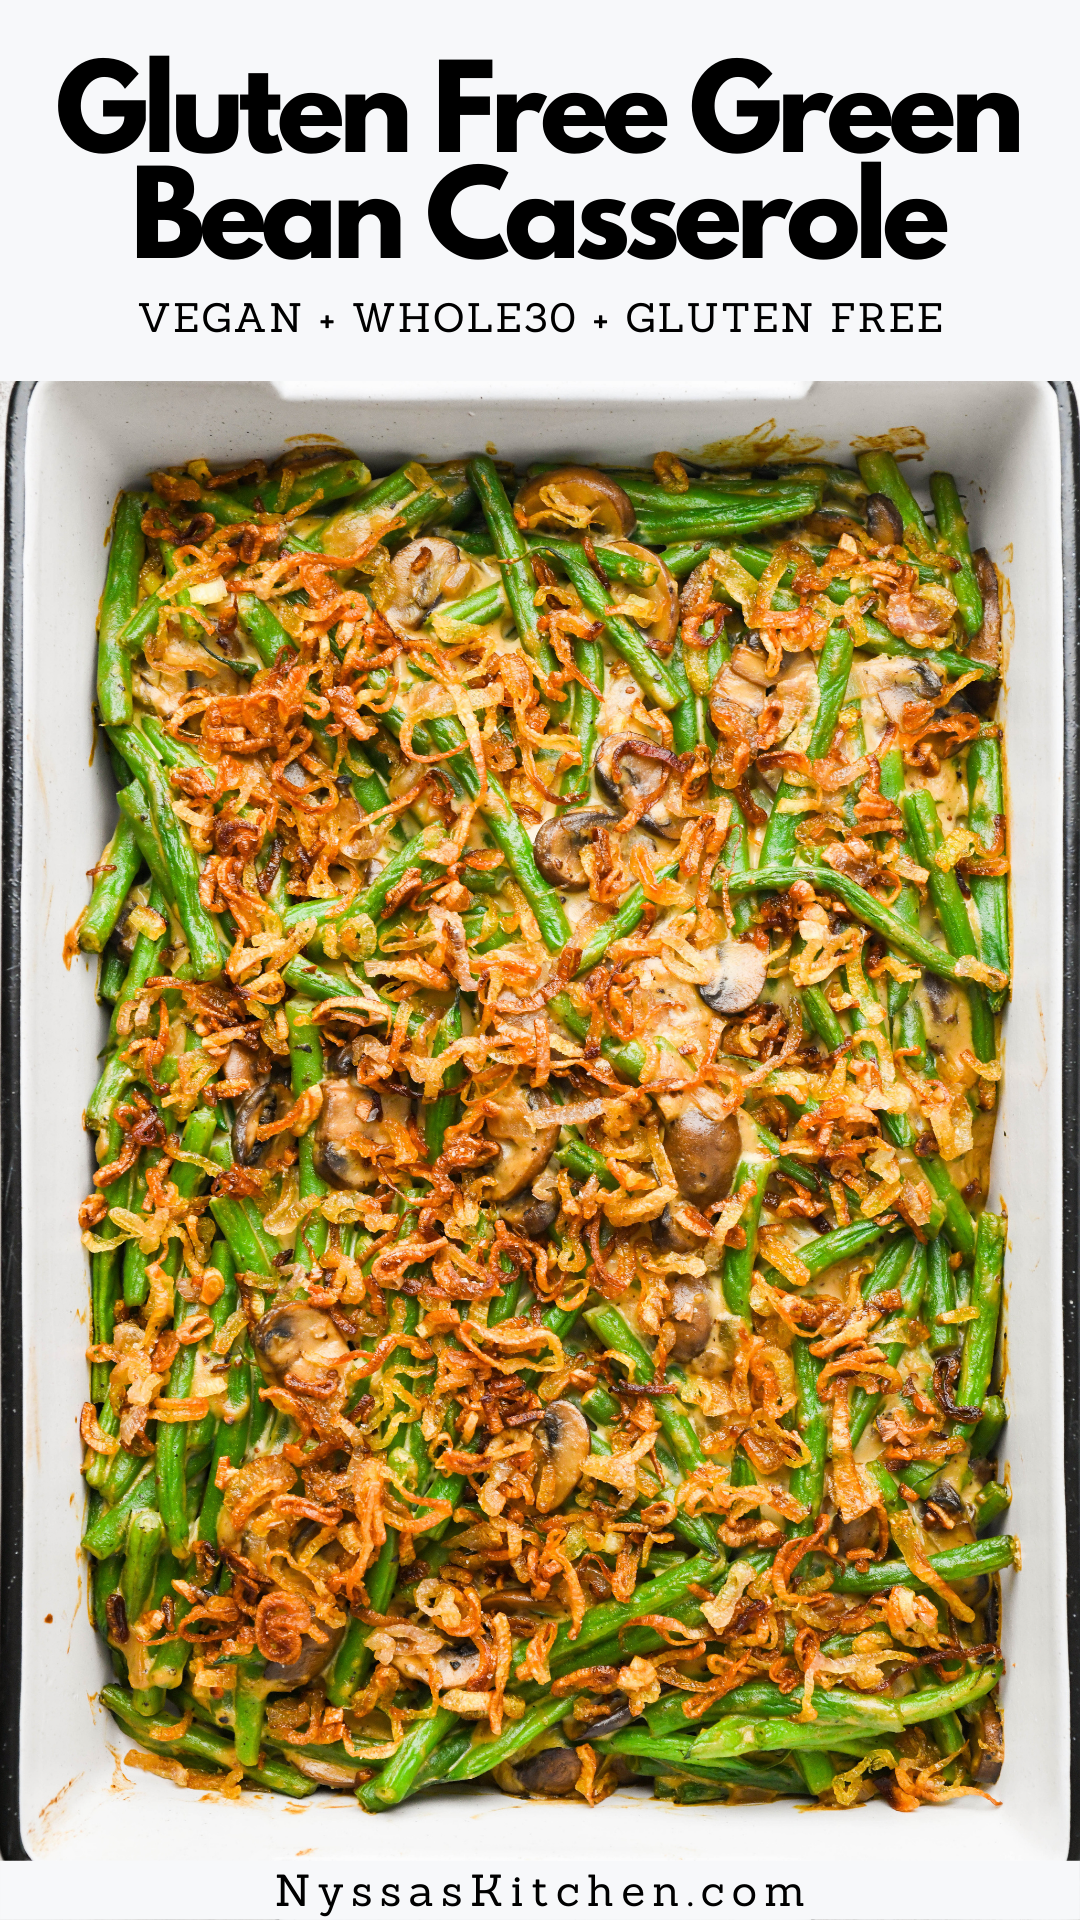 This gluten free green bean casserole is a healthier take on a Thanksgiving classic! Made with fresh green beans, mushrooms, crispy fried shallots, and an ultra creamy sauce that you'd never guess is dairy free. Gluten free, Whole30, vegan, and paleo.